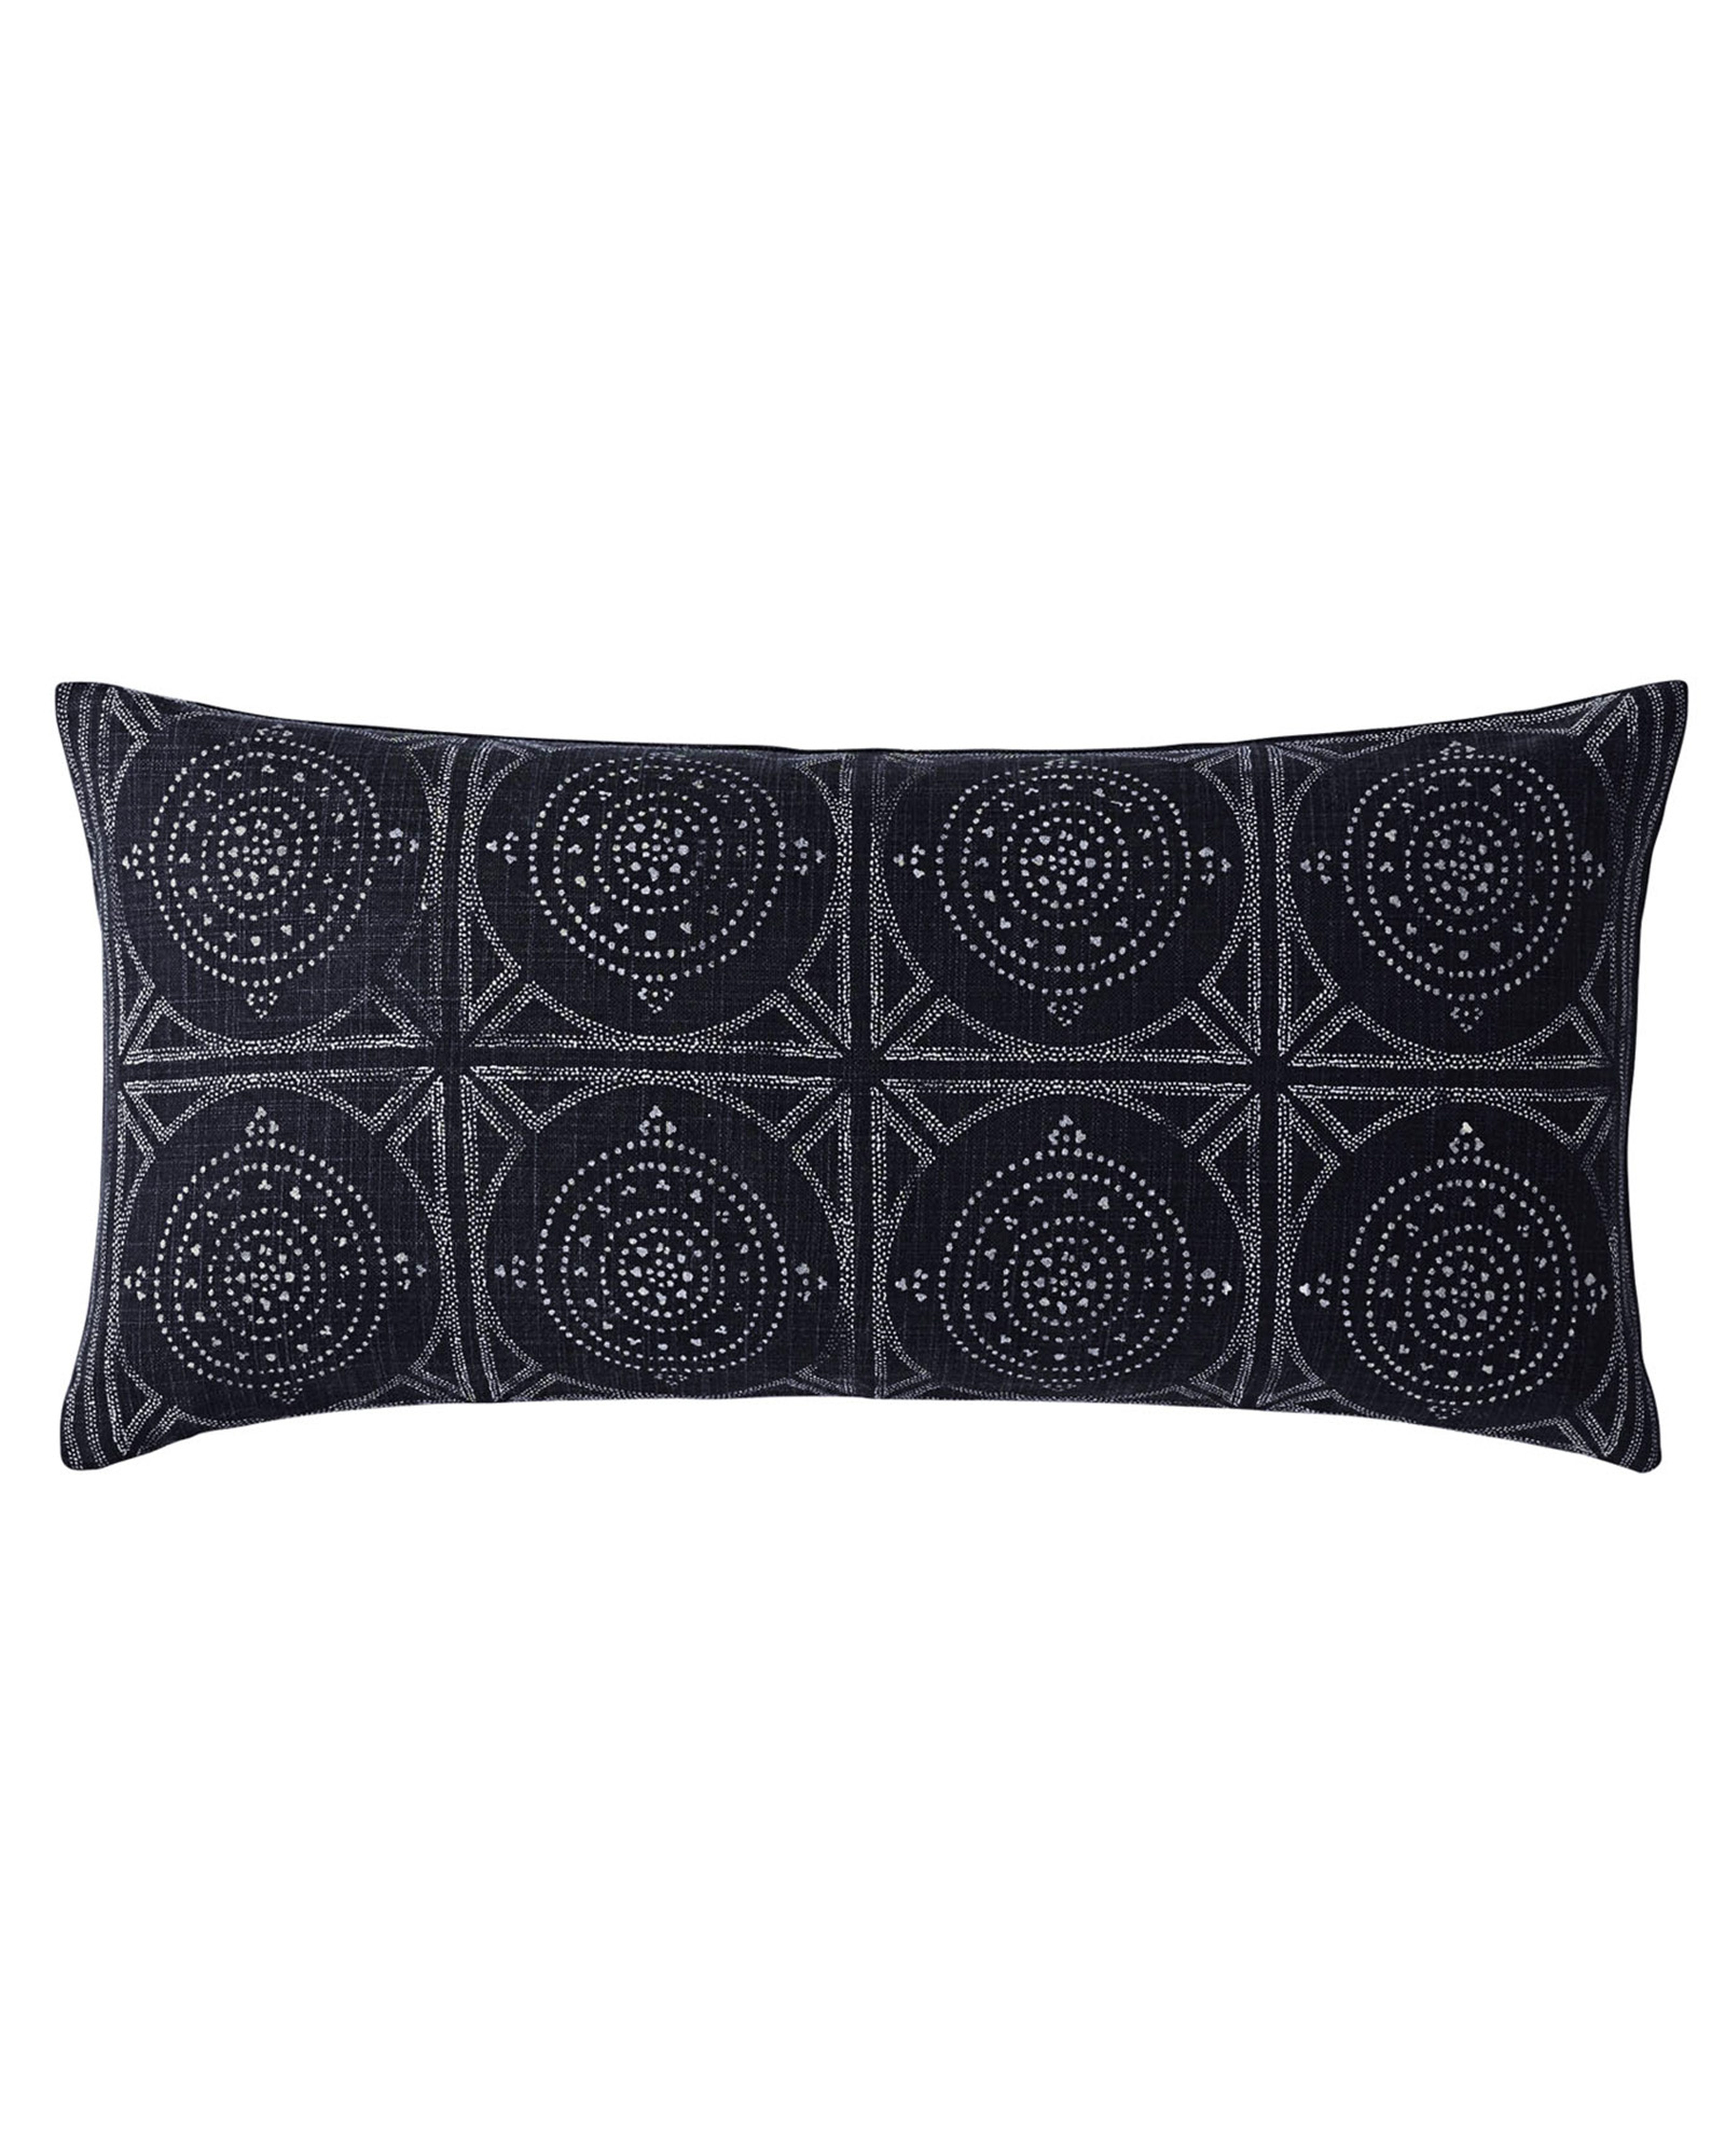 Camille Mosaic Lumbar 14 x 30" Pillow Cover - Indigo - Insert sold separately - Serena and Lily